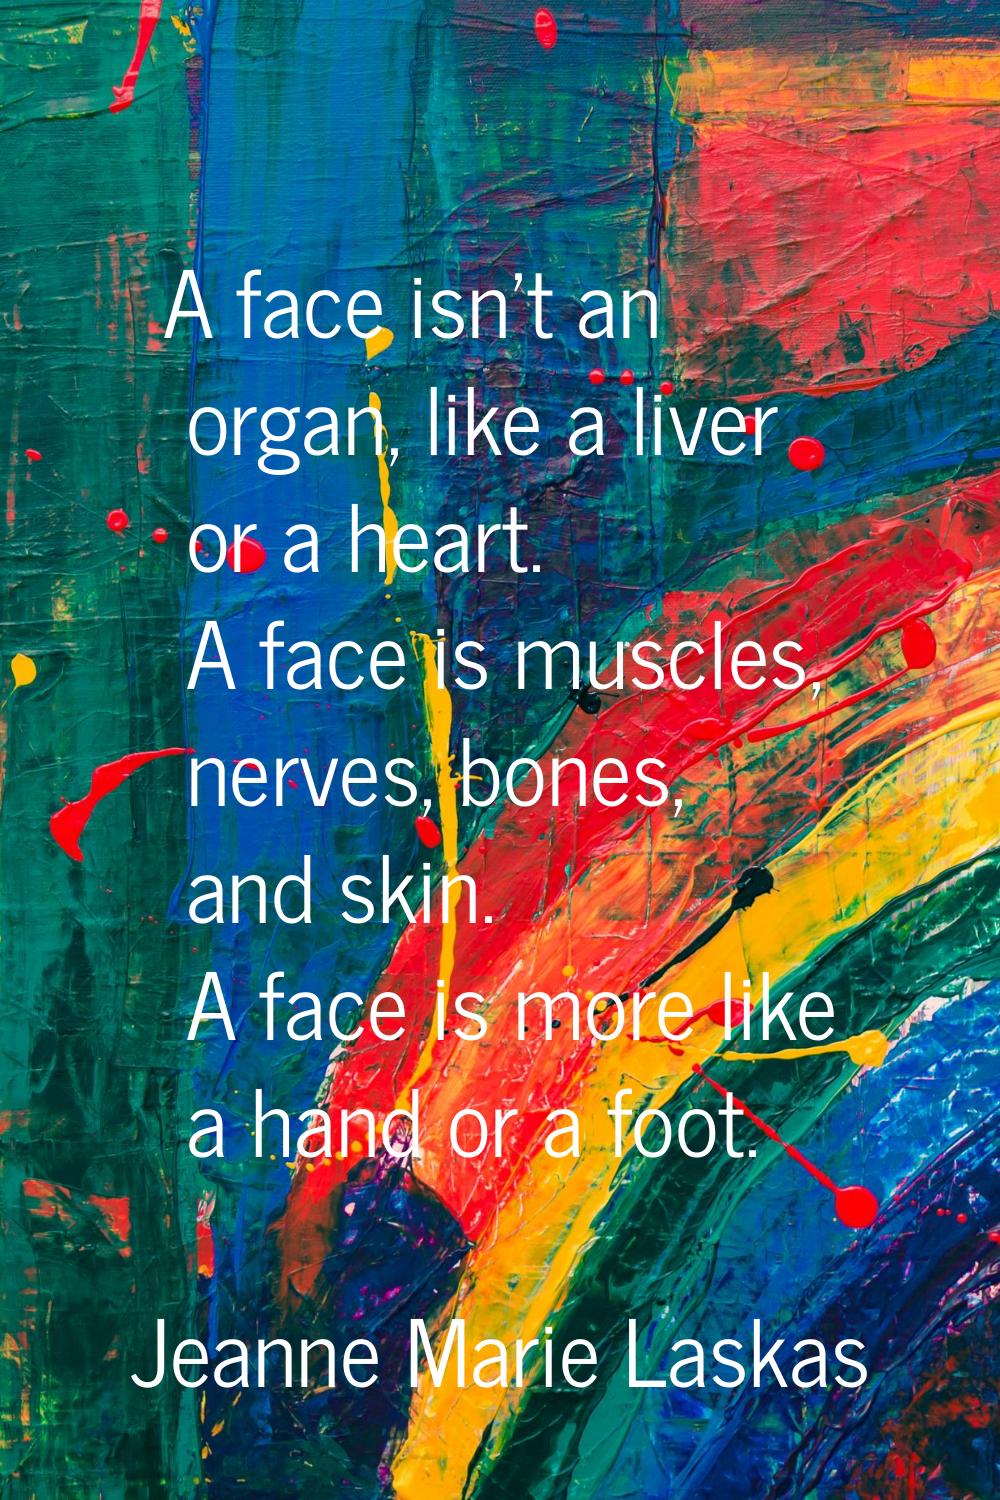 A face isn't an organ, like a liver or a heart. A face is muscles, nerves, bones, and skin. A face 